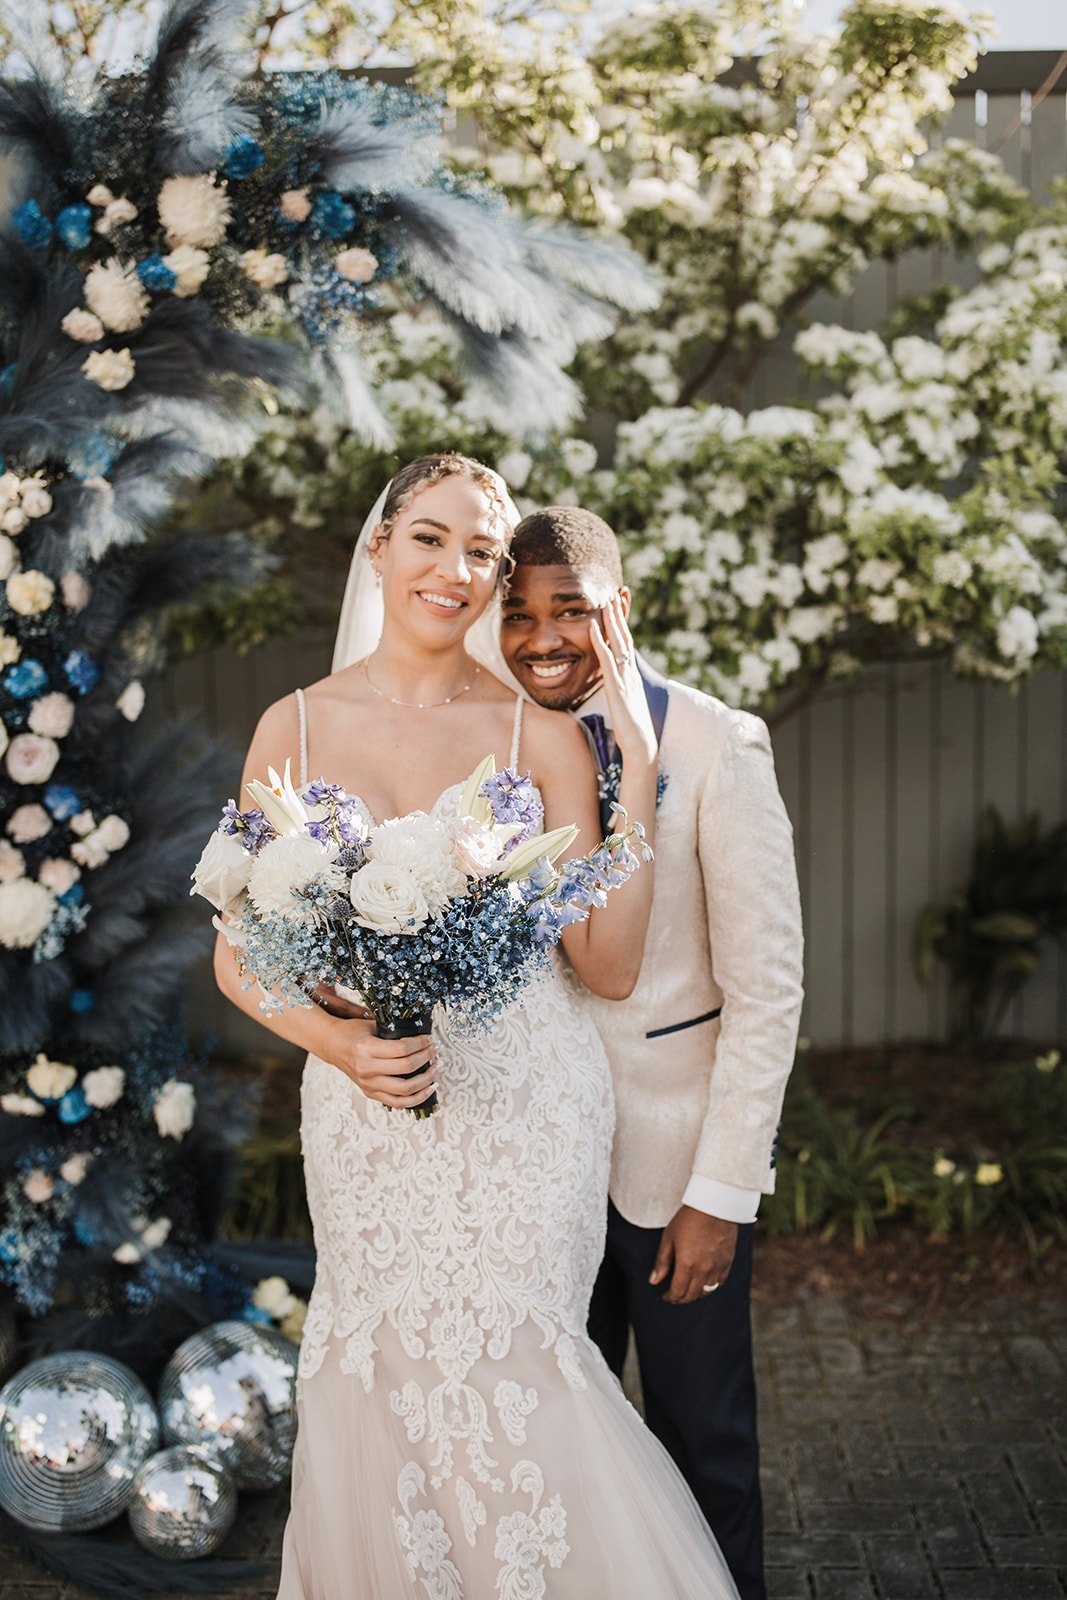 natalia-and-kelvins-starry-night-themed-wedding-at-victory-north-in-savannah-georgia-with-celestial-inspired-wedding-florals-designed-by-savannah-wedding-florist-ivory-and-beau-savannah-florist-savannah-wedding-12.jpg